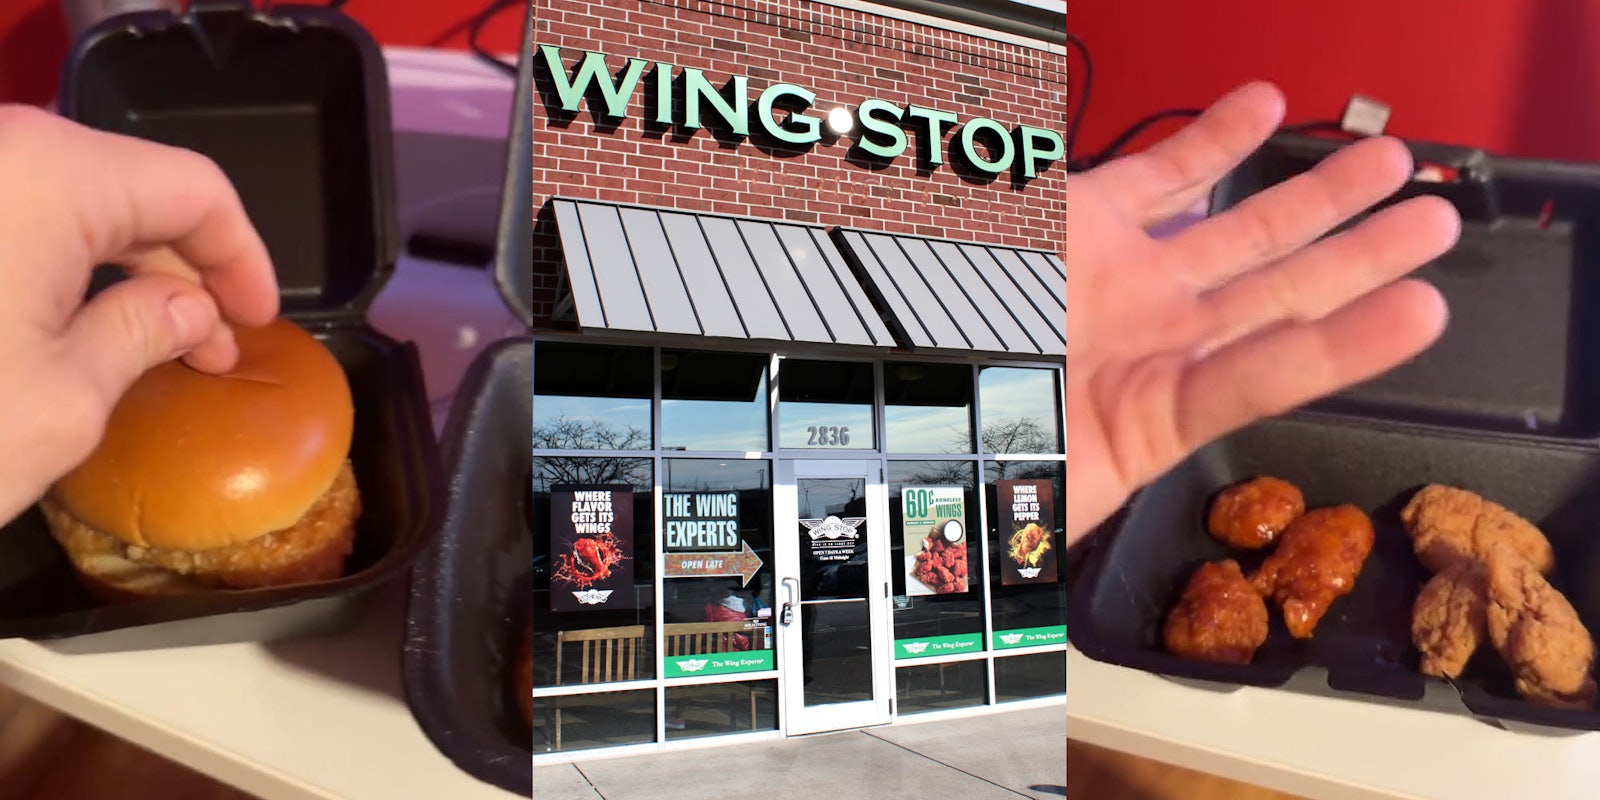 hand pressing burger in black container (l) Wing Stop sign on brick building (c) hand ot above wings in black container (r)